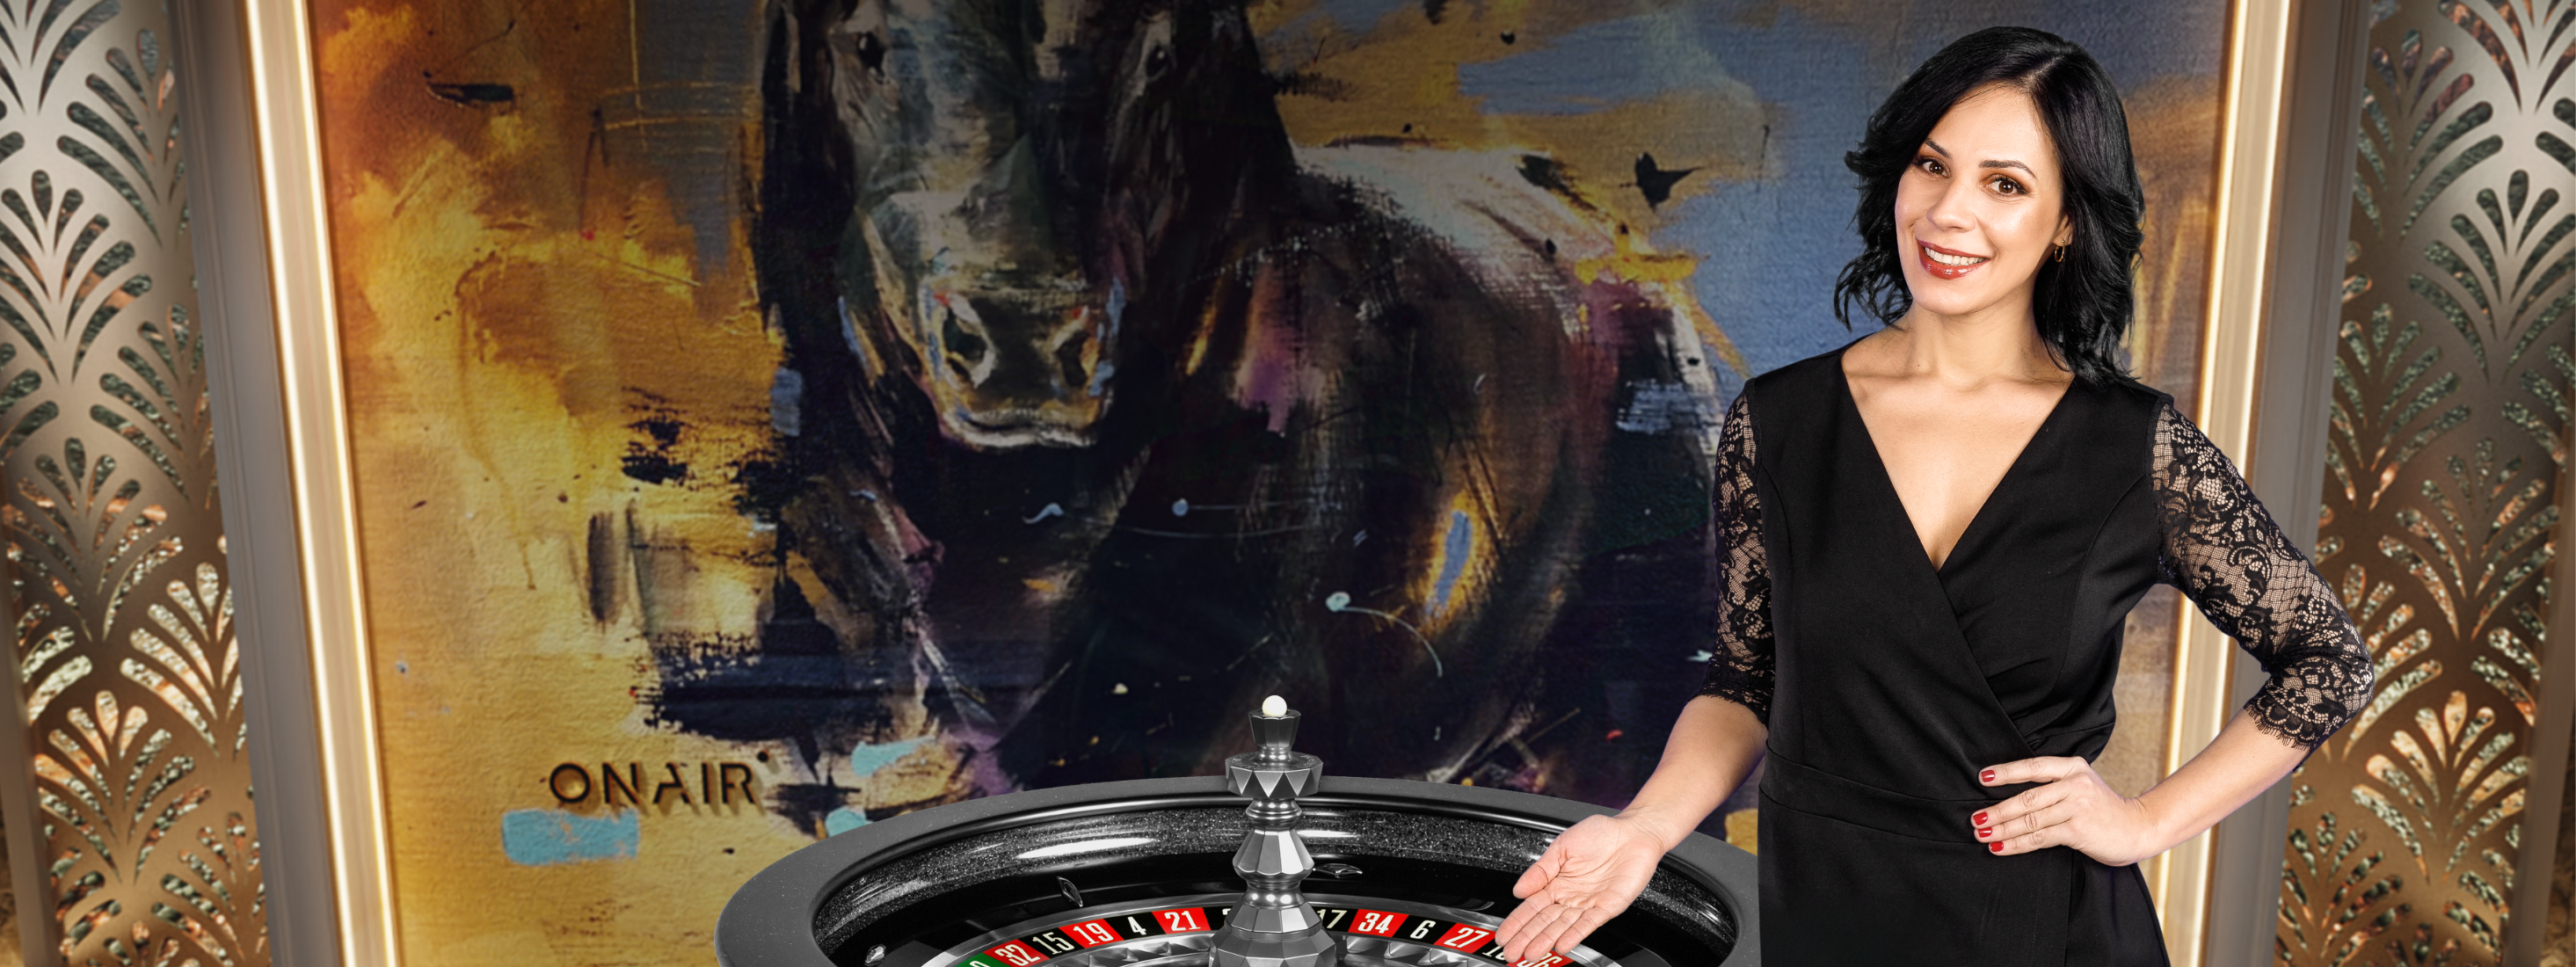 Female presenter near a roulette wheel in one of our studios in Spain.